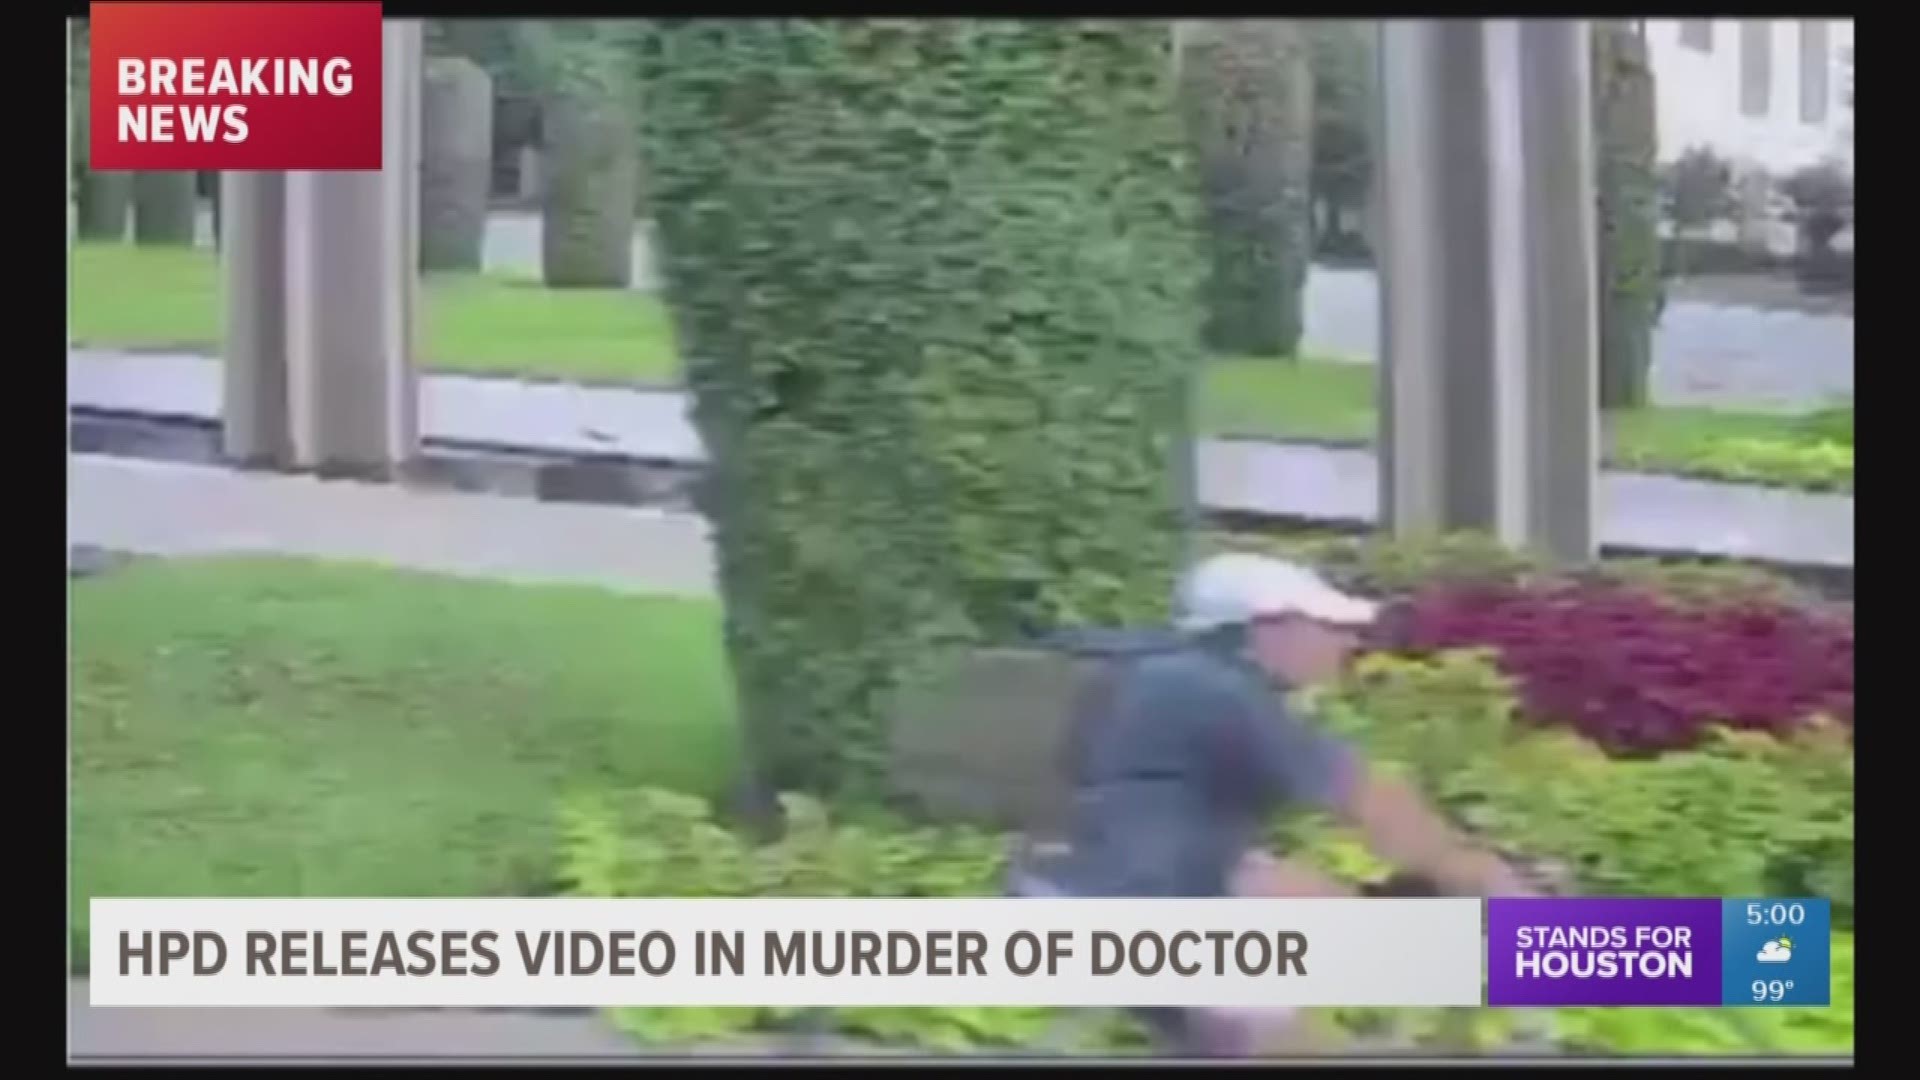 Houston police have released new video that shows the suspect who gunned down a prominent cardiologist in the Texas Medical Center on Friday. The video from a Metro Lift bus also shows Dr. Mark Hausknect riding a yellow bicycle on North Main Street just b